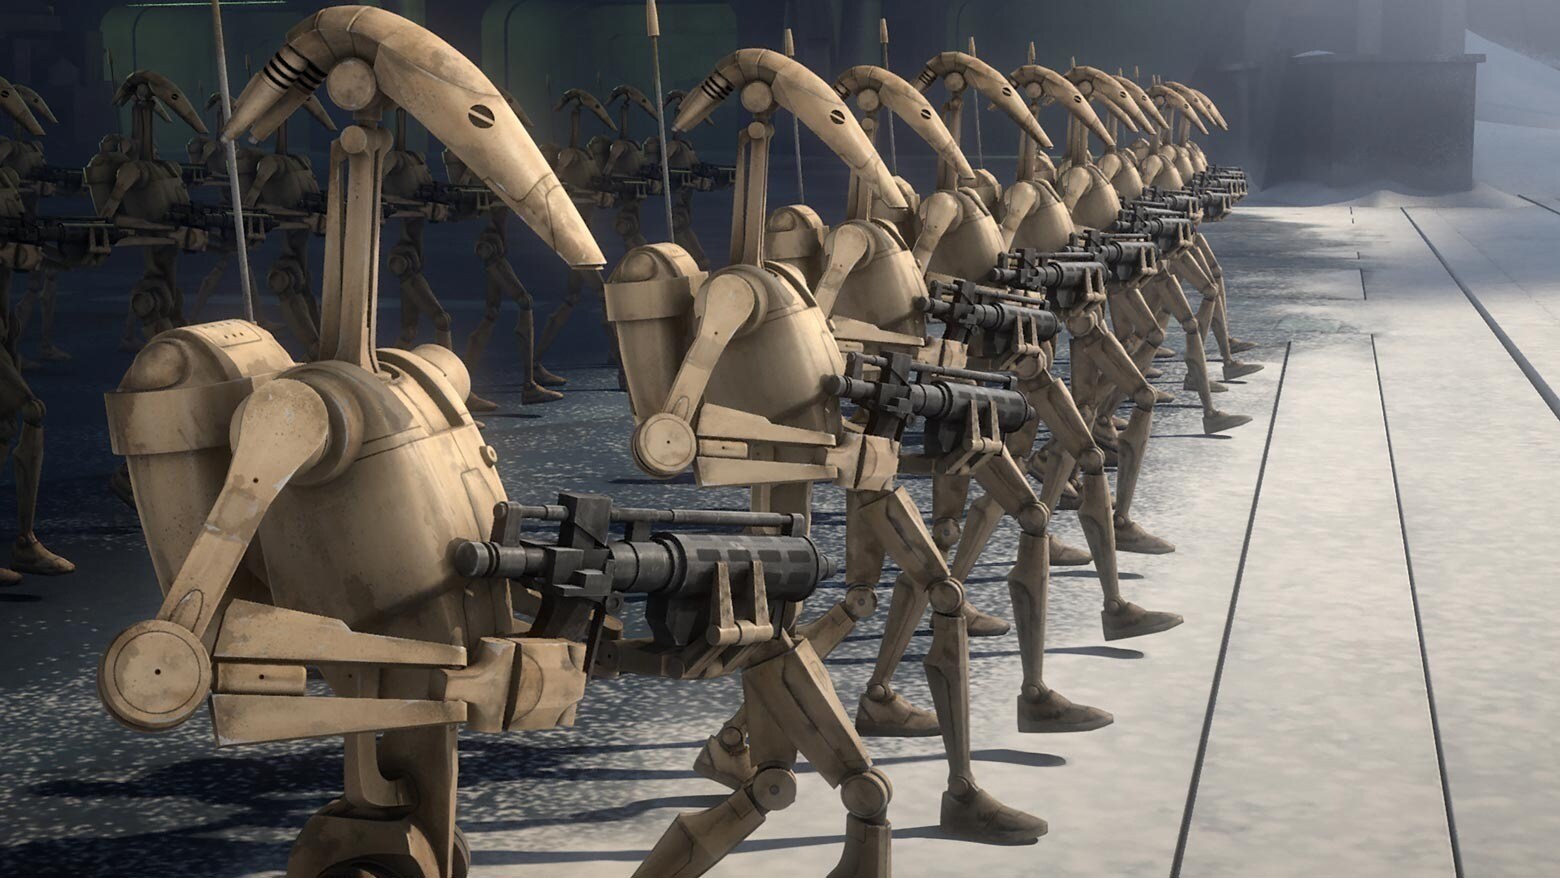 An army of old separatist battle droids